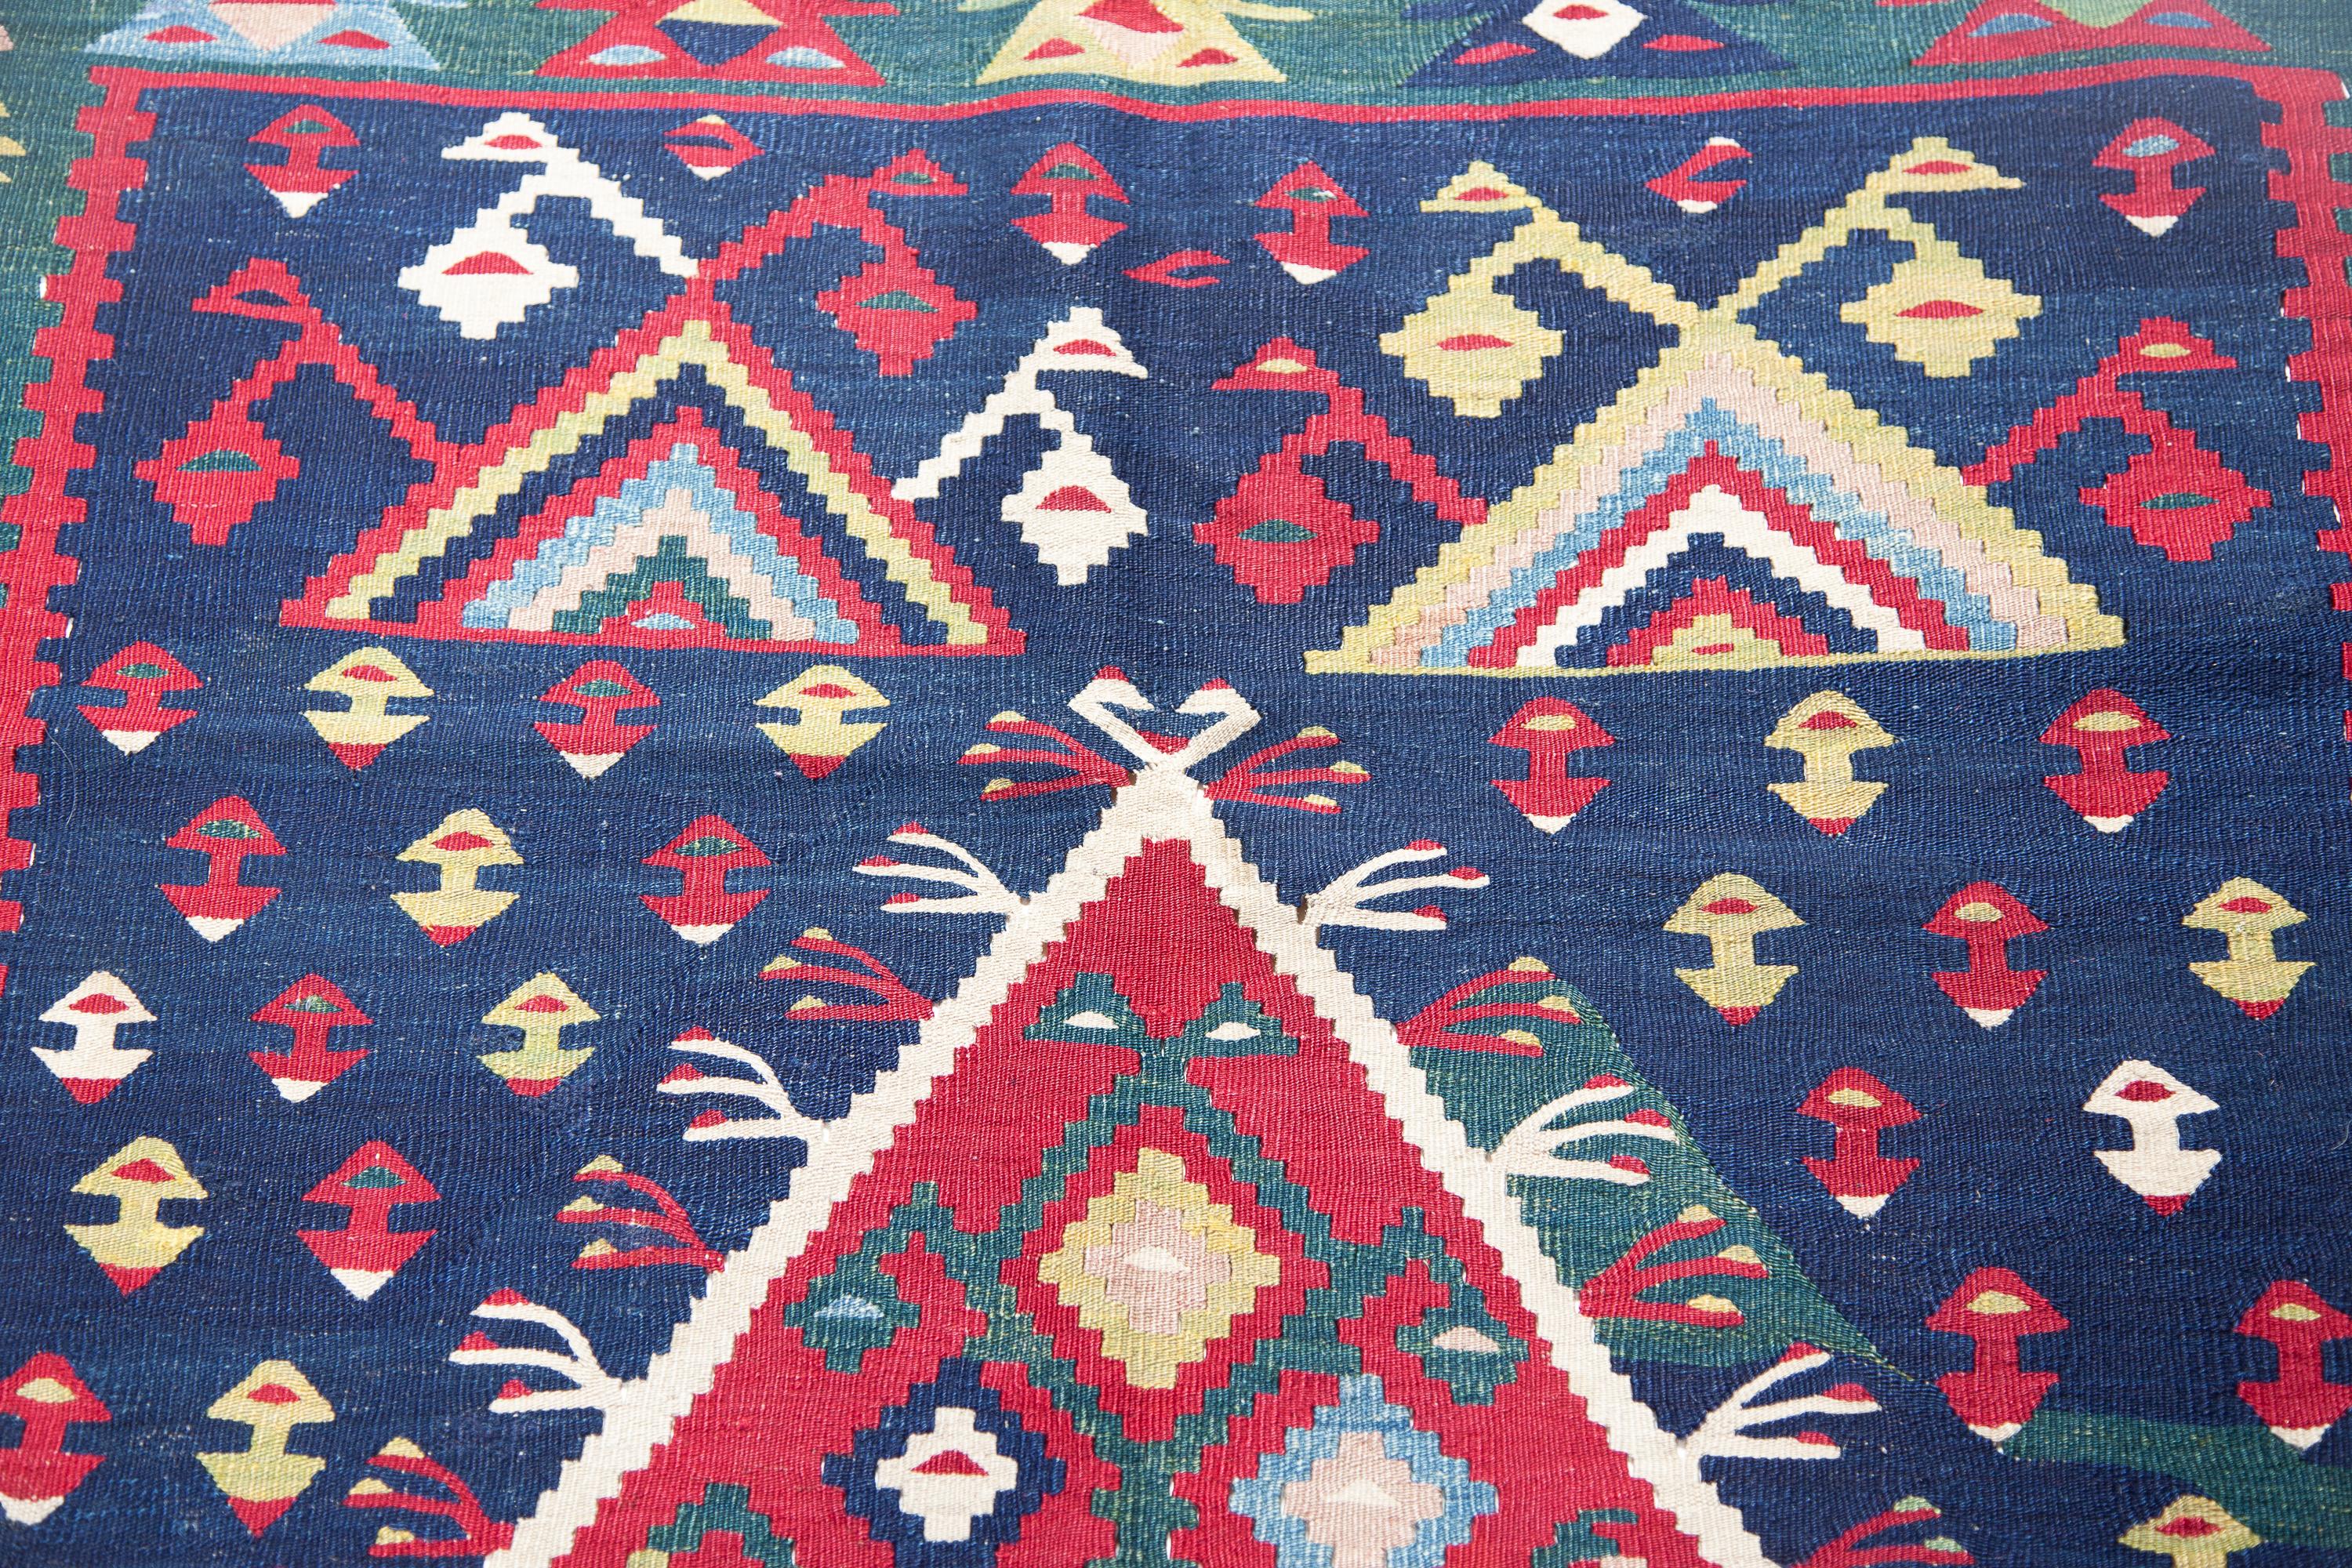 This is an antique Unique Sarkoy (Sharkoy or Şarköy) Kilim rug from Western Turkey with a rare and beautiful color composition.

Sarkoy kilims are very finely woven in slitweave in a variety of sizes and are made in one piece. Many feature the tree